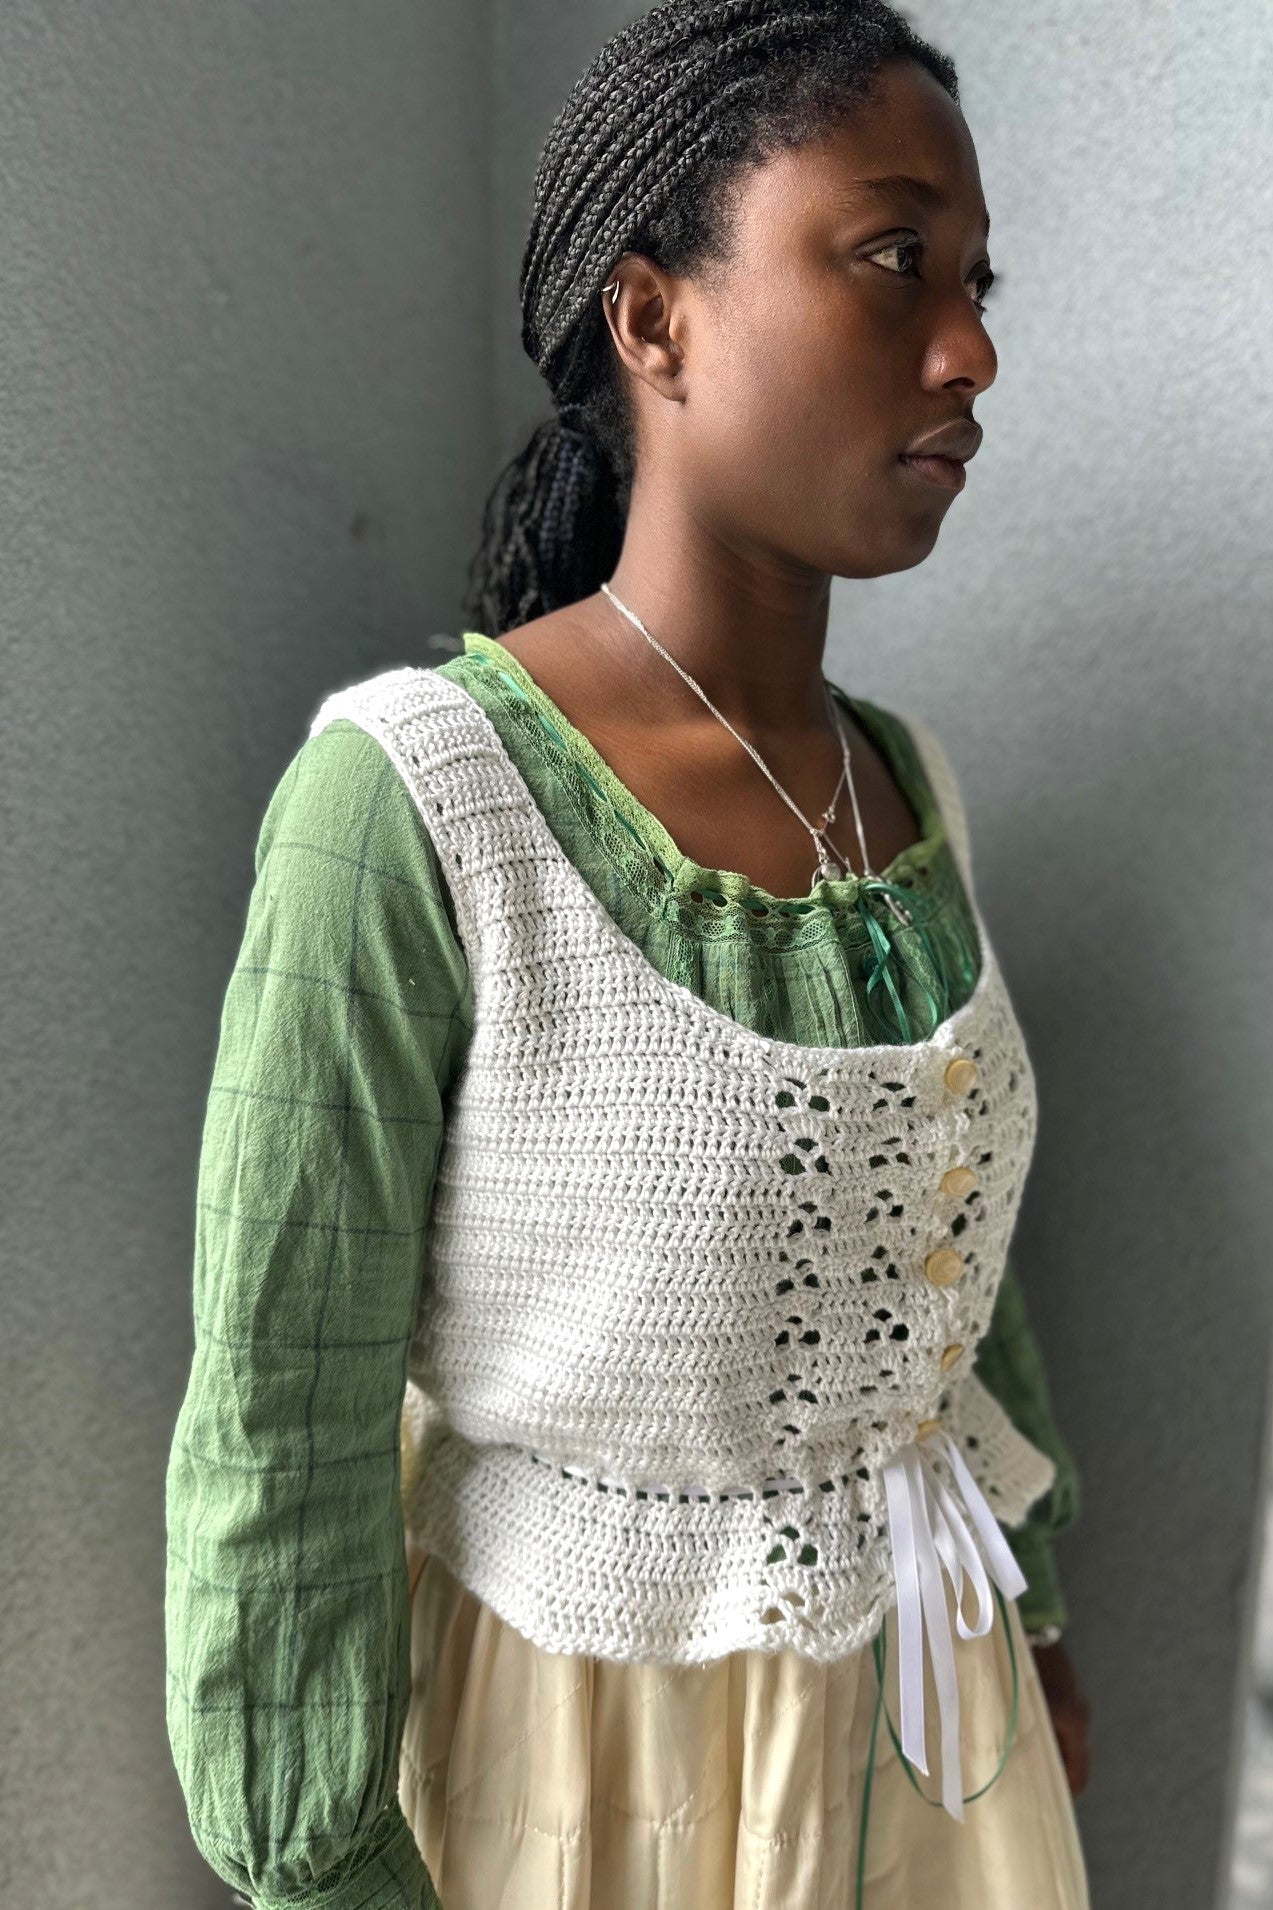 Black woman wearing a cream quilted skirt with a green blouse and white crocheted camisole on top - in front of a grey wall.